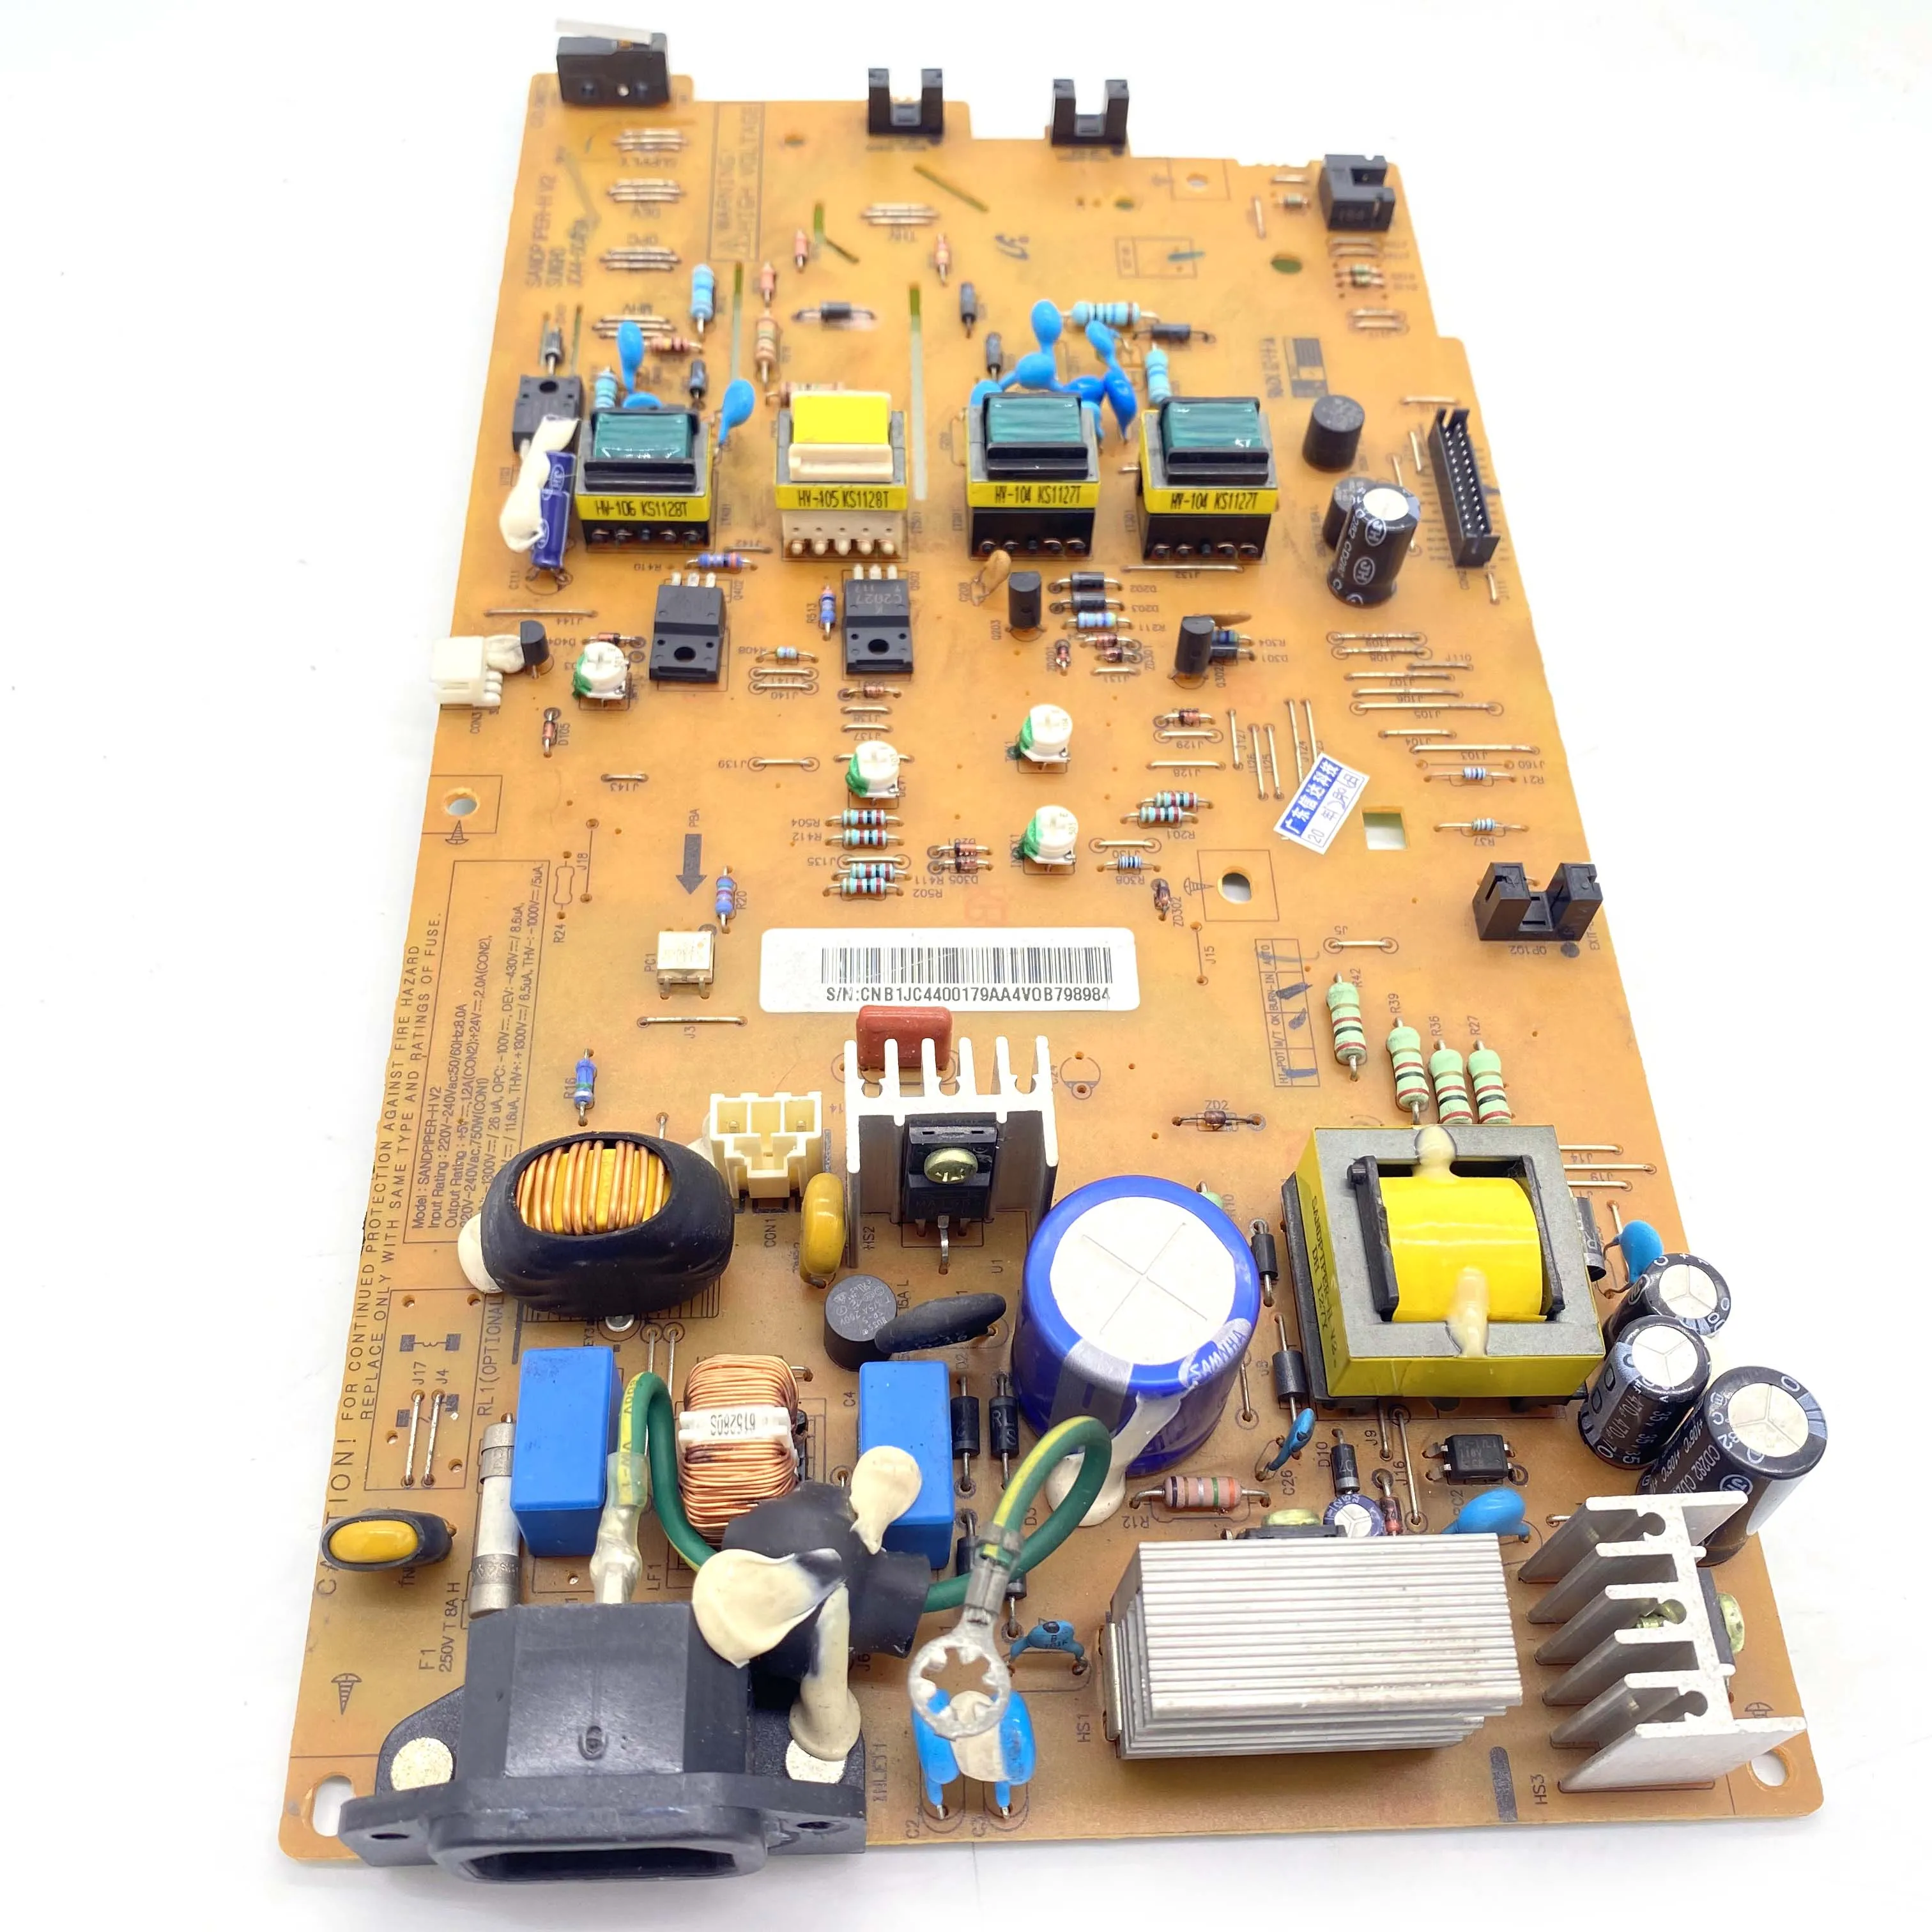 

High Voltage Power Supply Board SCX-4623F 220V JC44-00179A fits for Samsung 4321NS 4835 4623 3401FH 4521HS 4833 3405